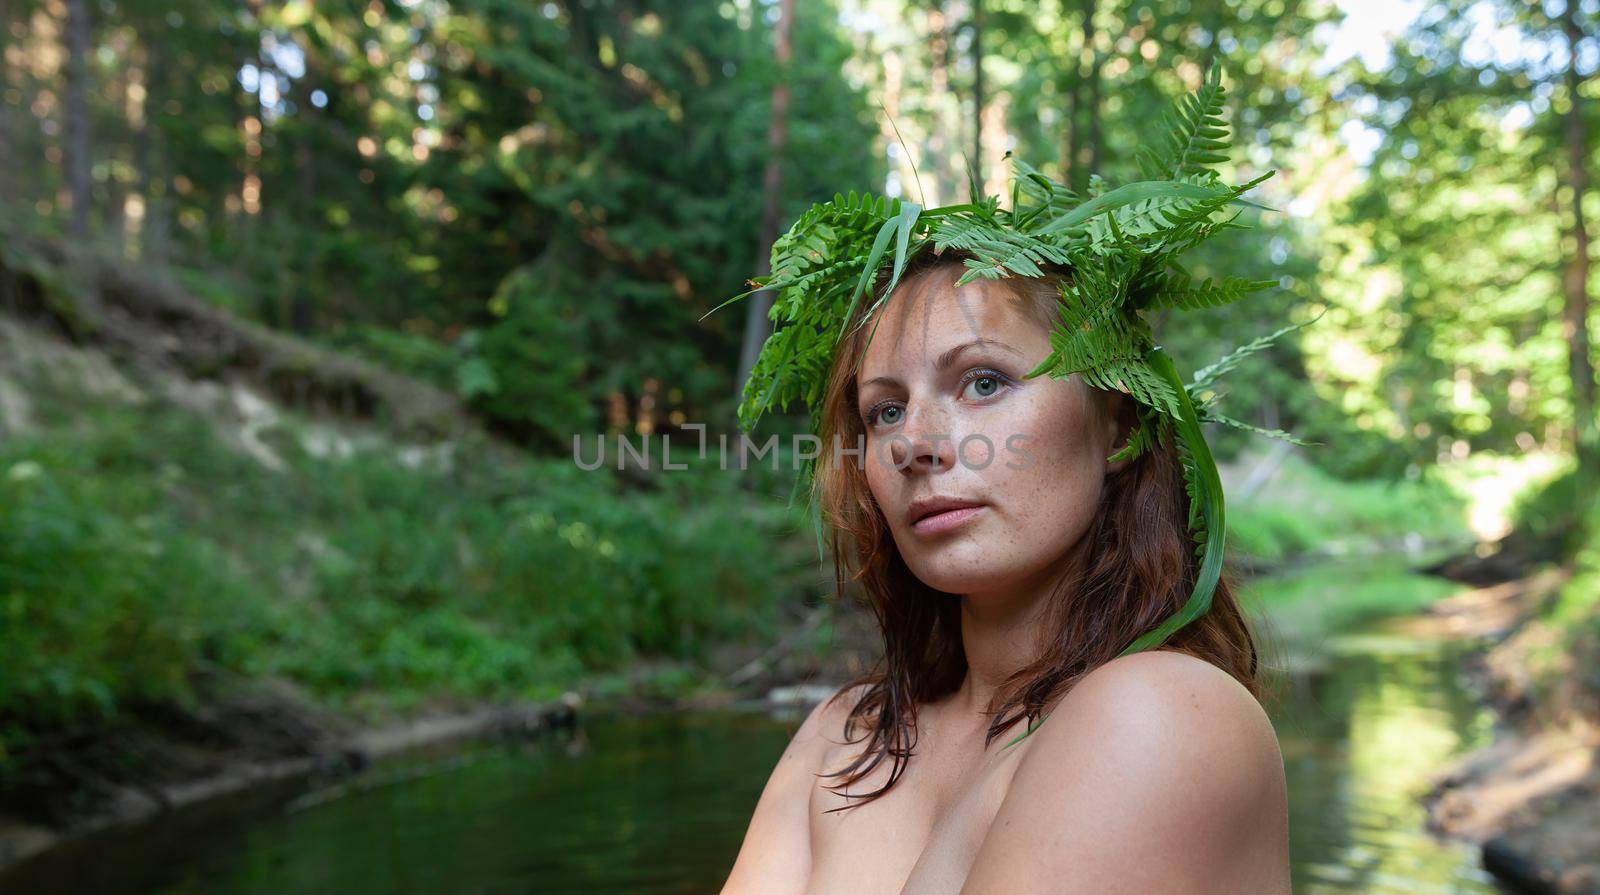 A beautiful young nude woman with fern wreath on her head enjoying nature in the forest river